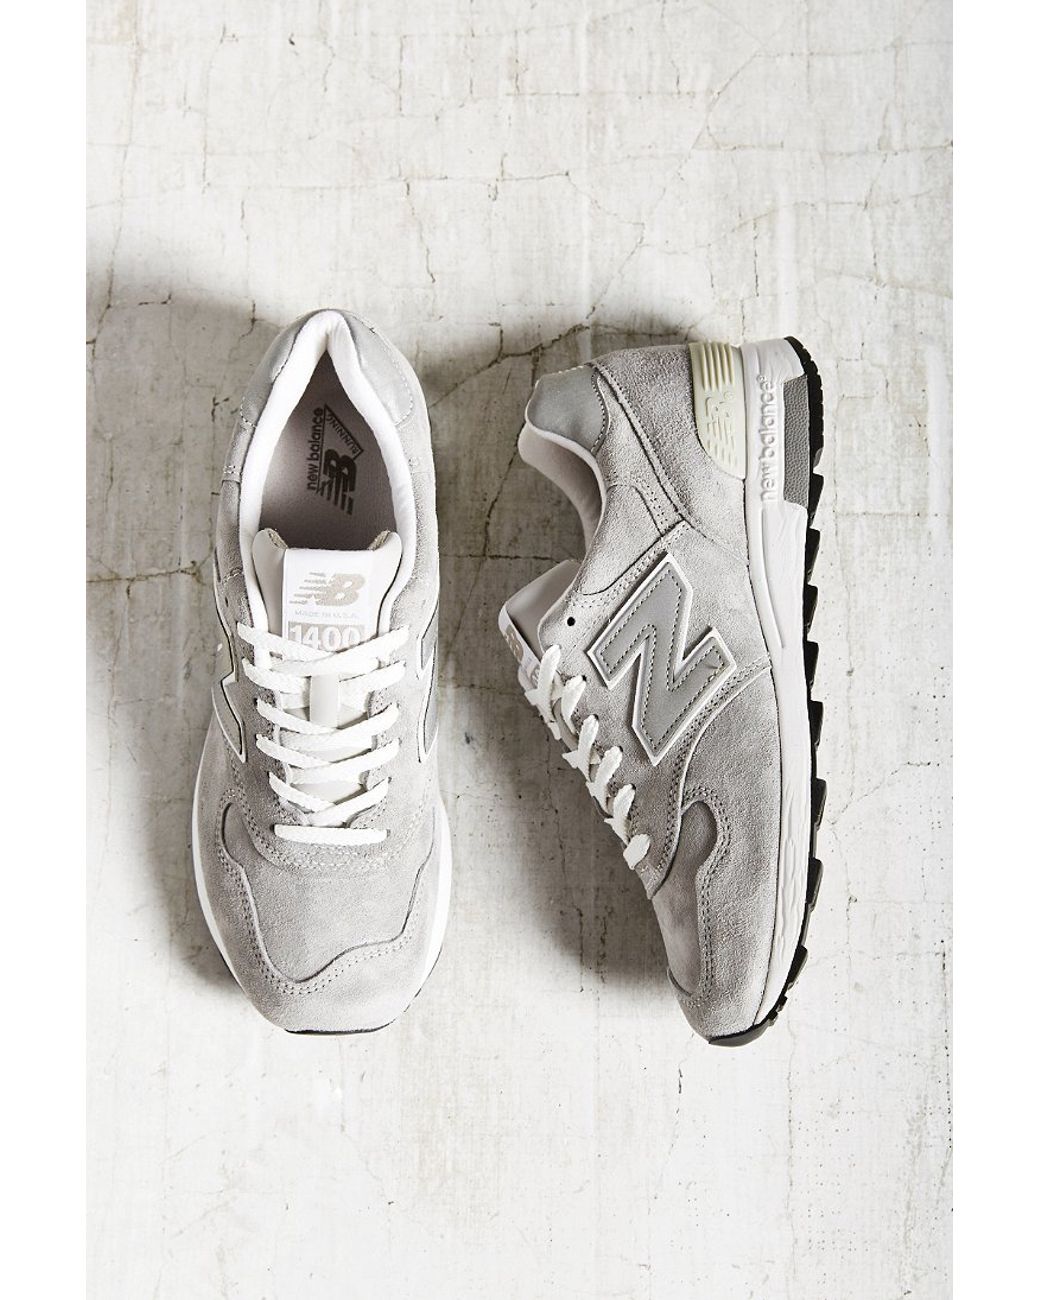 New Balance Made In Usa 1400 Connoisseur Running Sneaker in Grey (Gray) |  Lyst